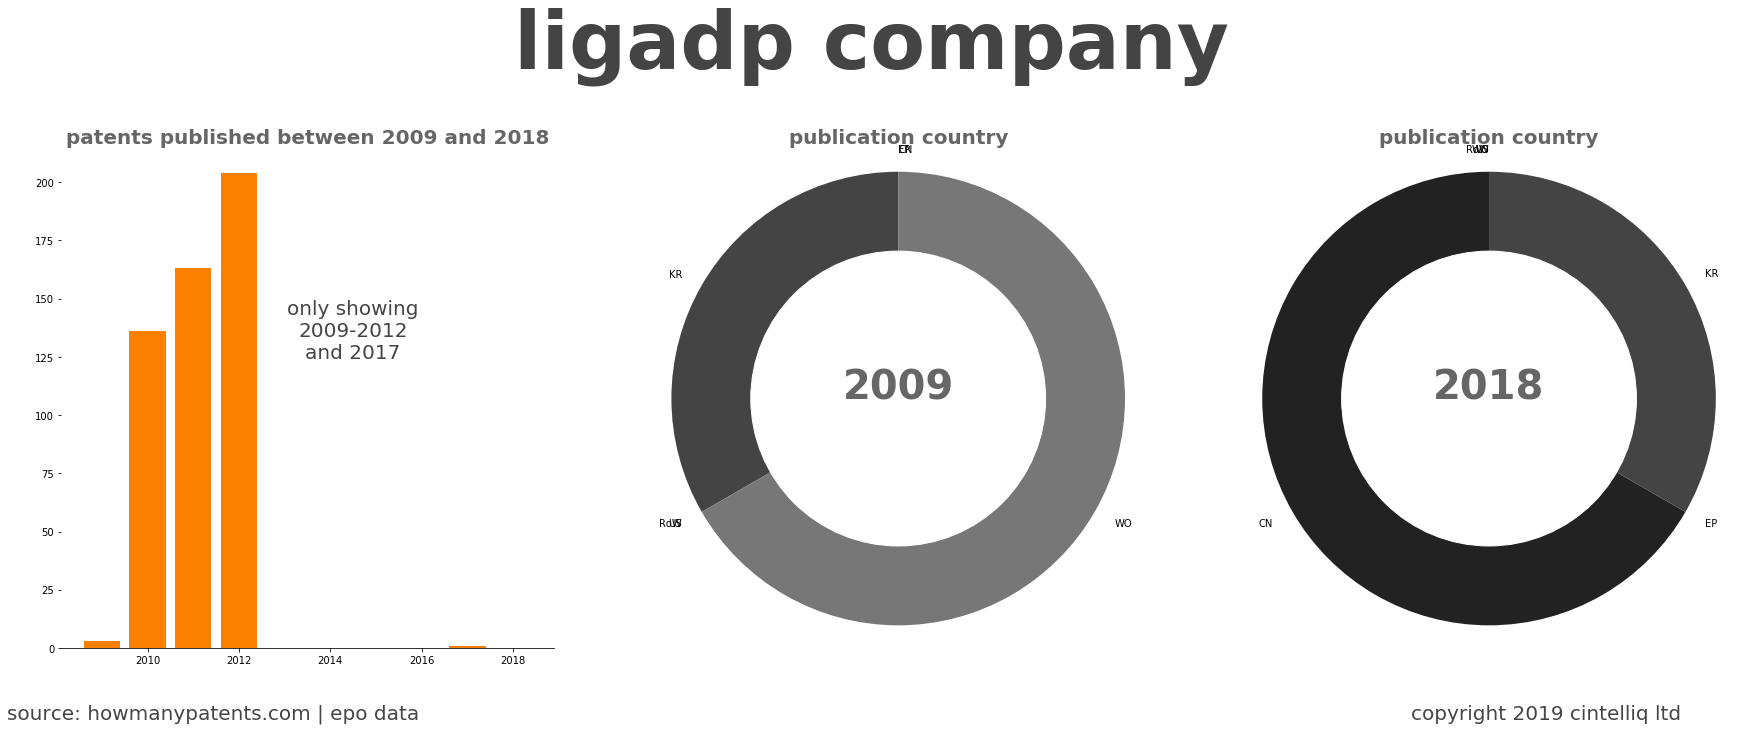 summary of patents for Ligadp Company